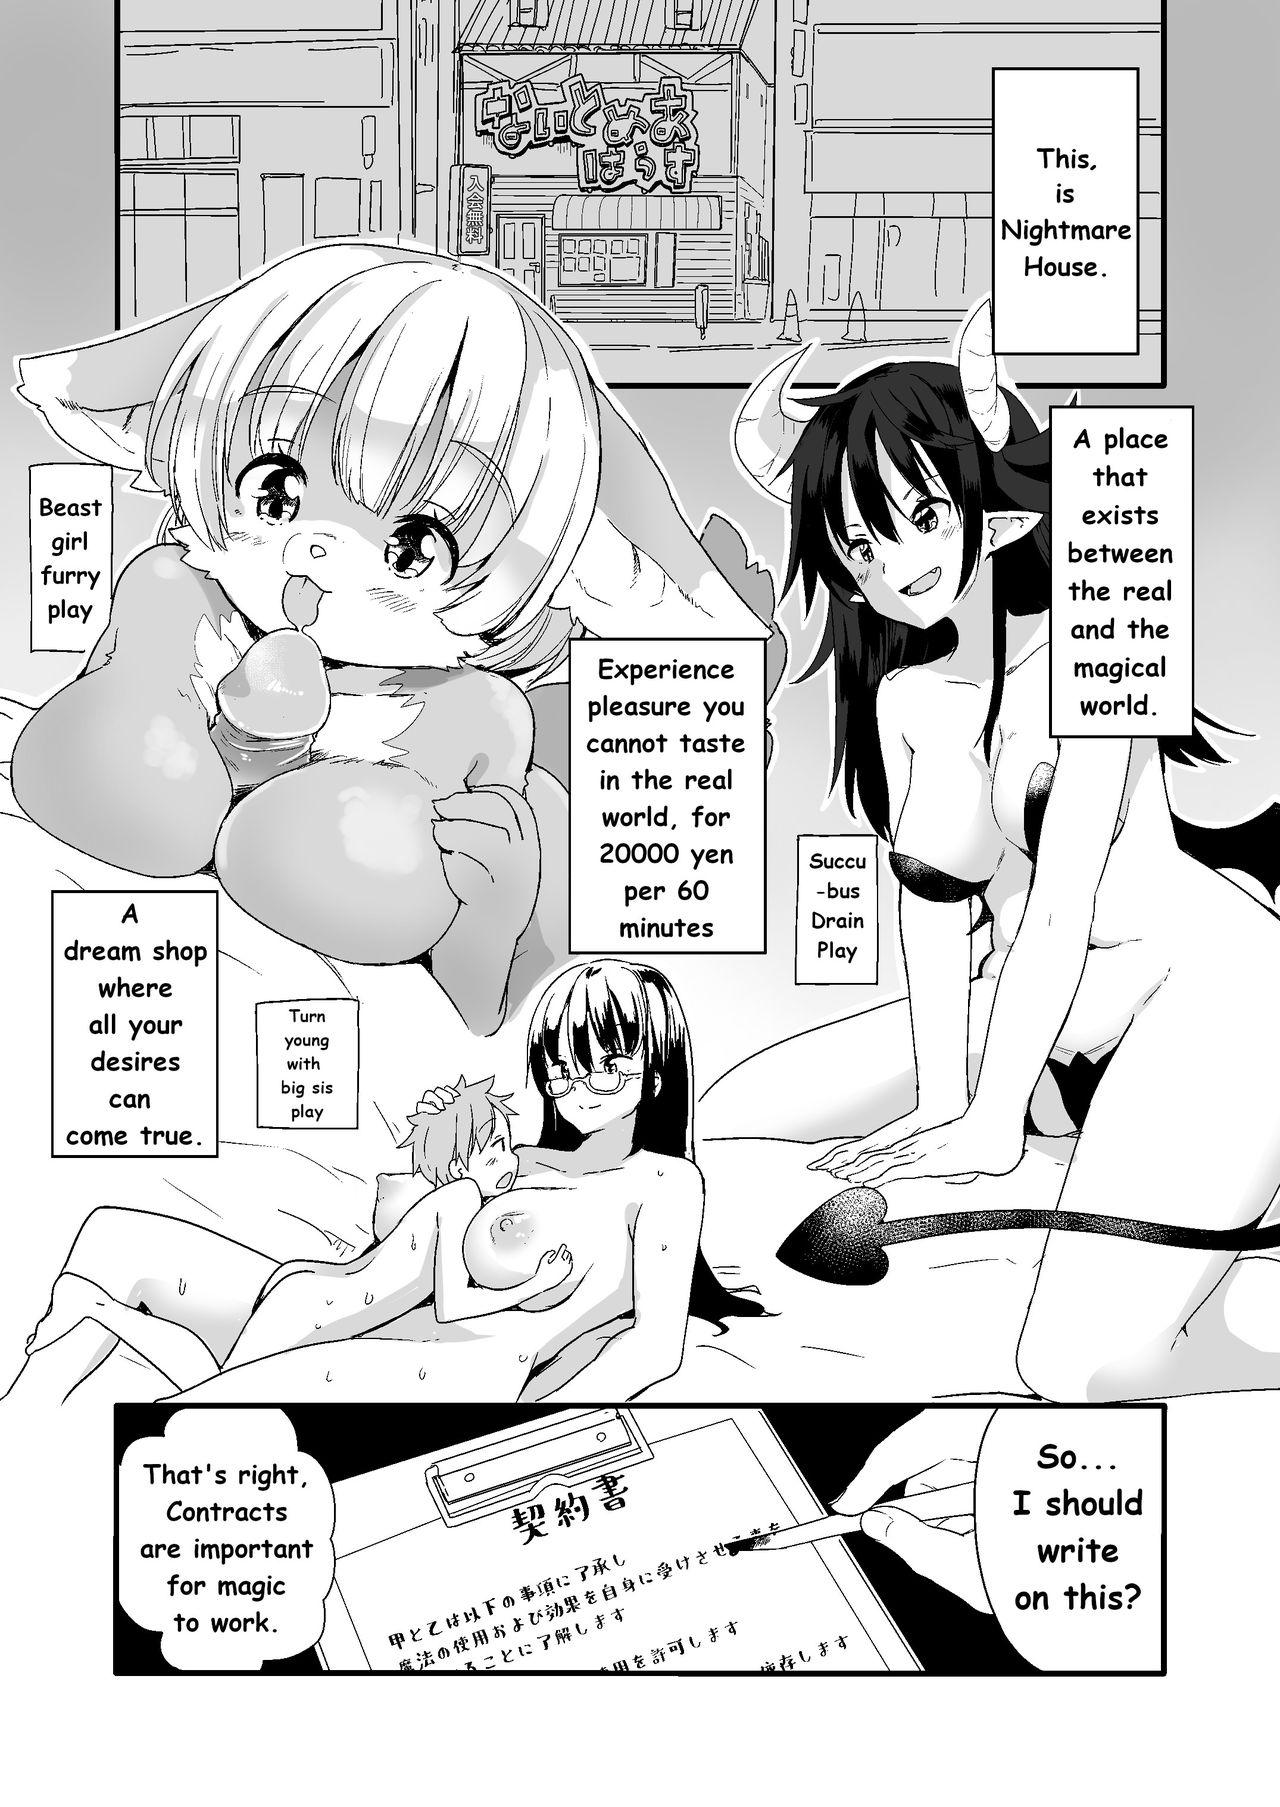 Piss Nightmare House e Youkoso | Welcome to the Nightmare House - Original Gaycum - Picture 1